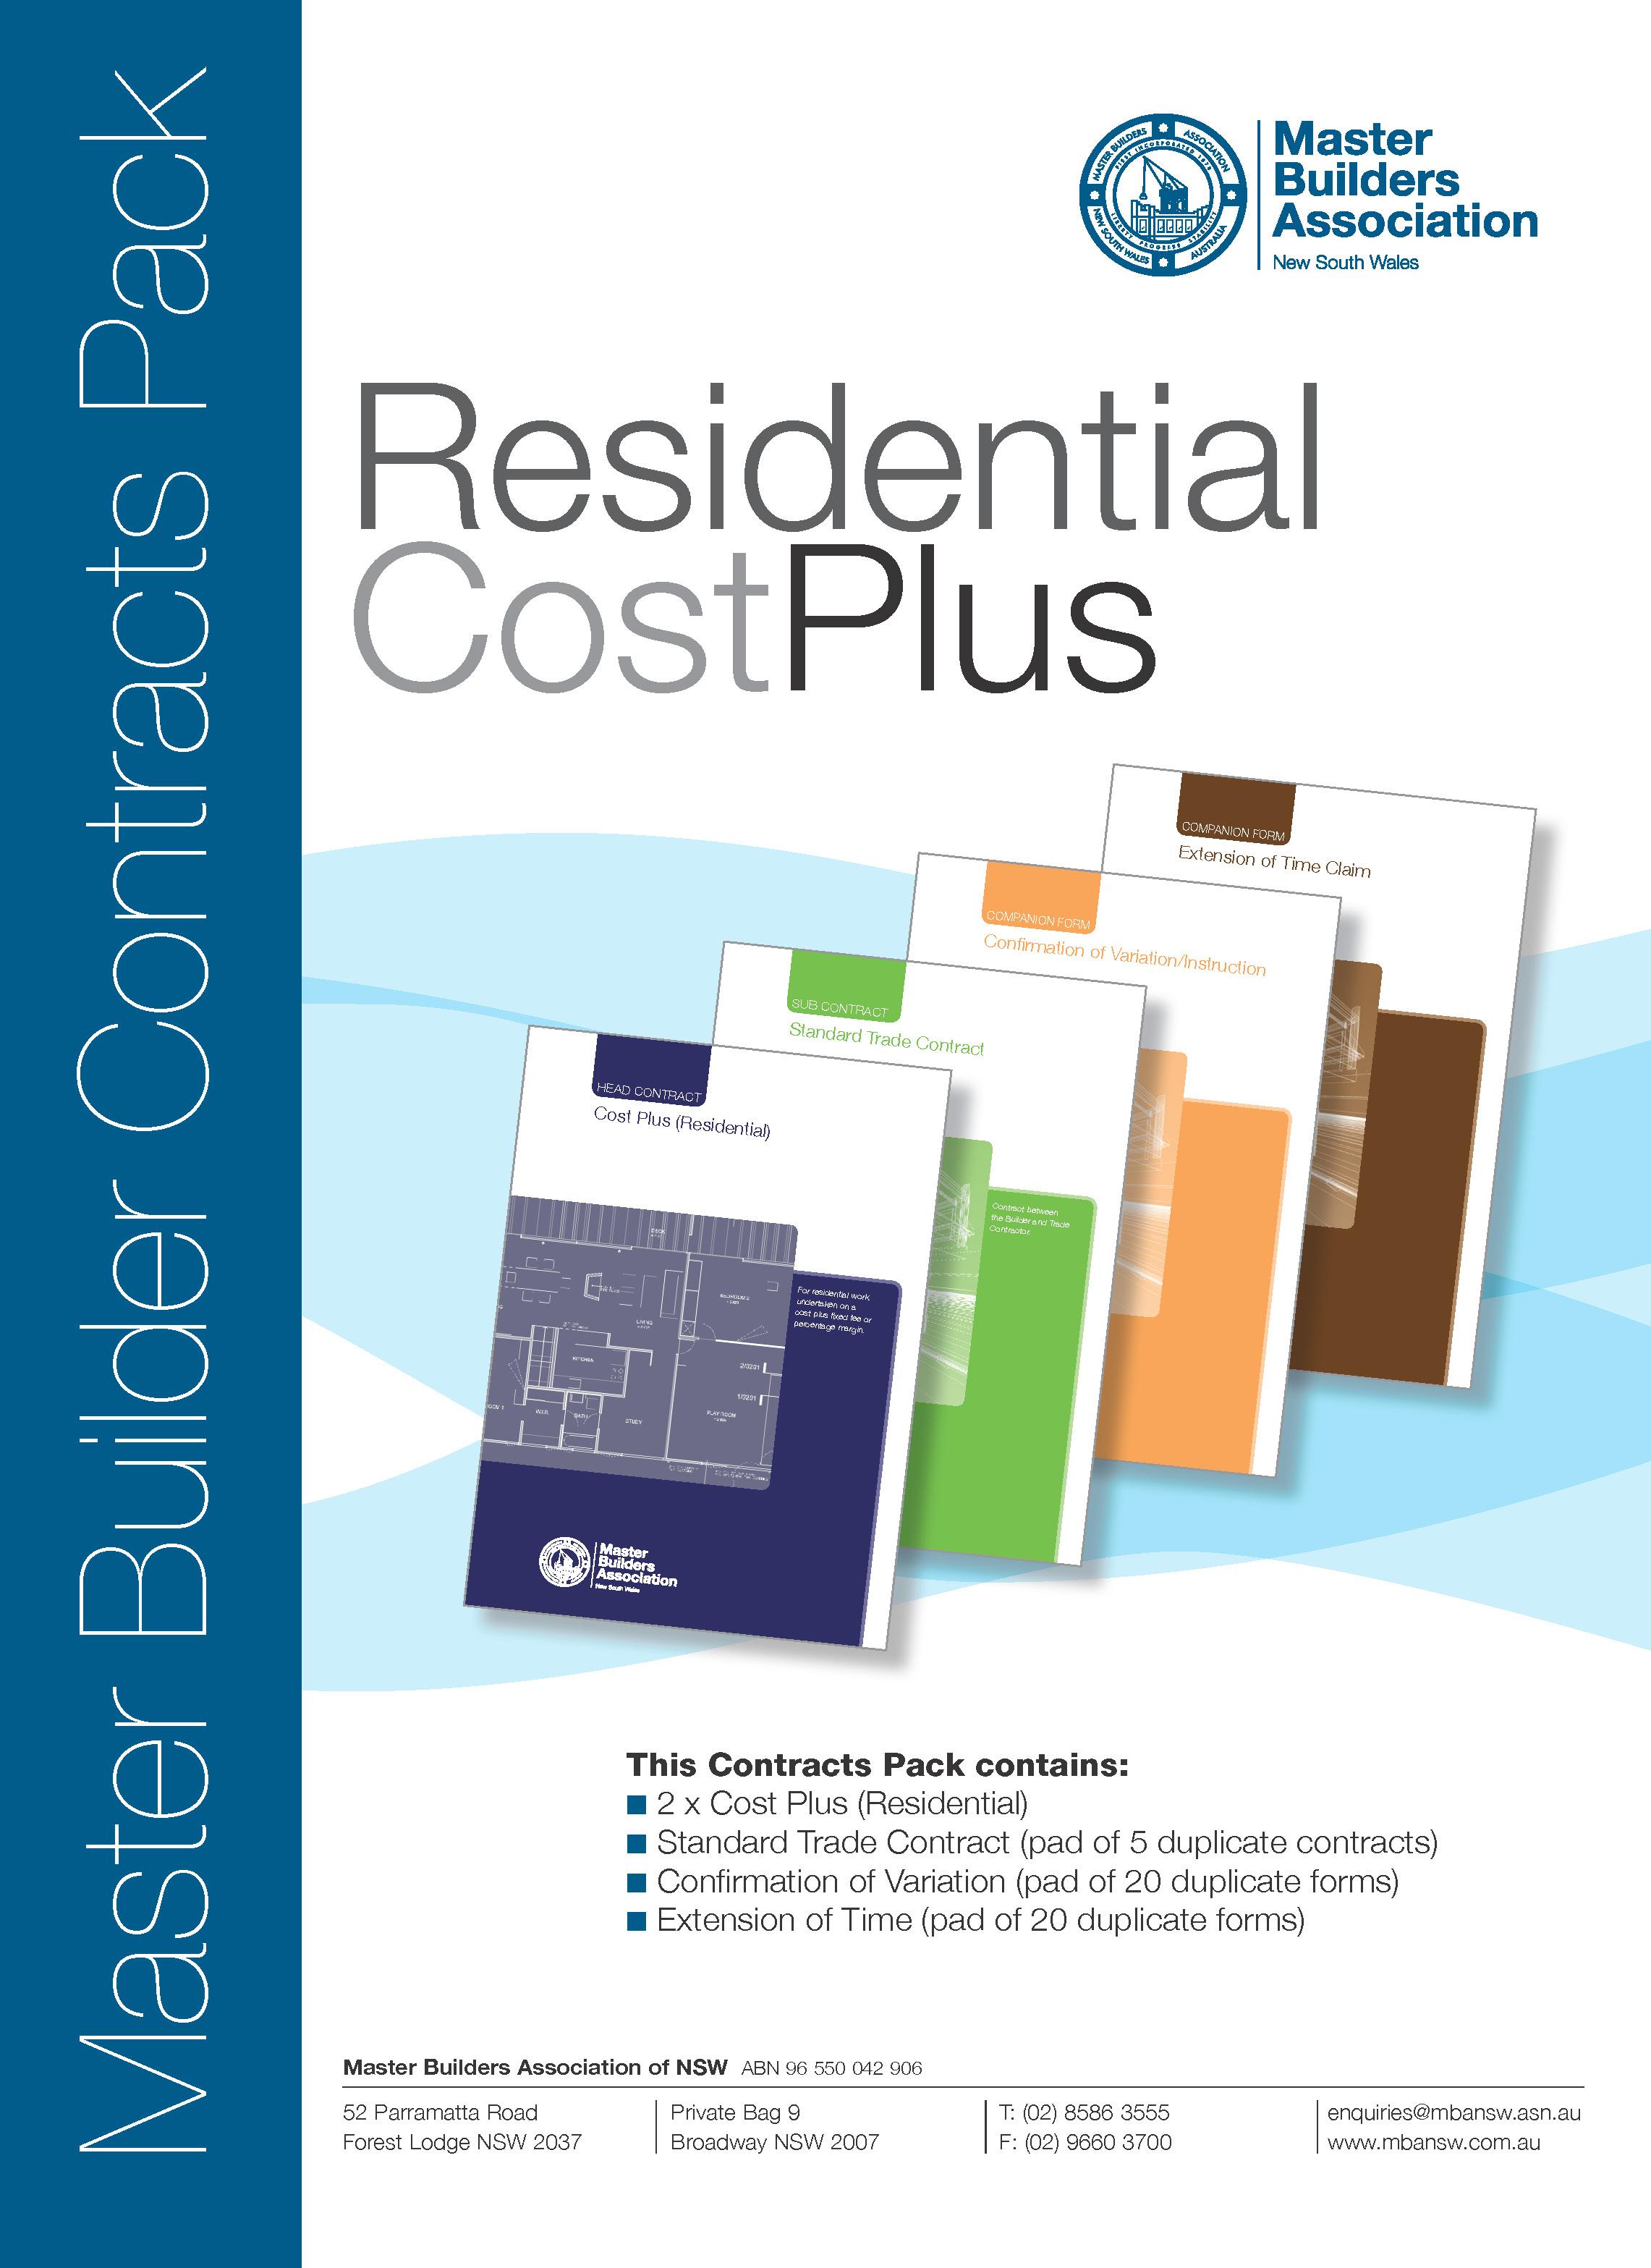 Residential Cost Plus